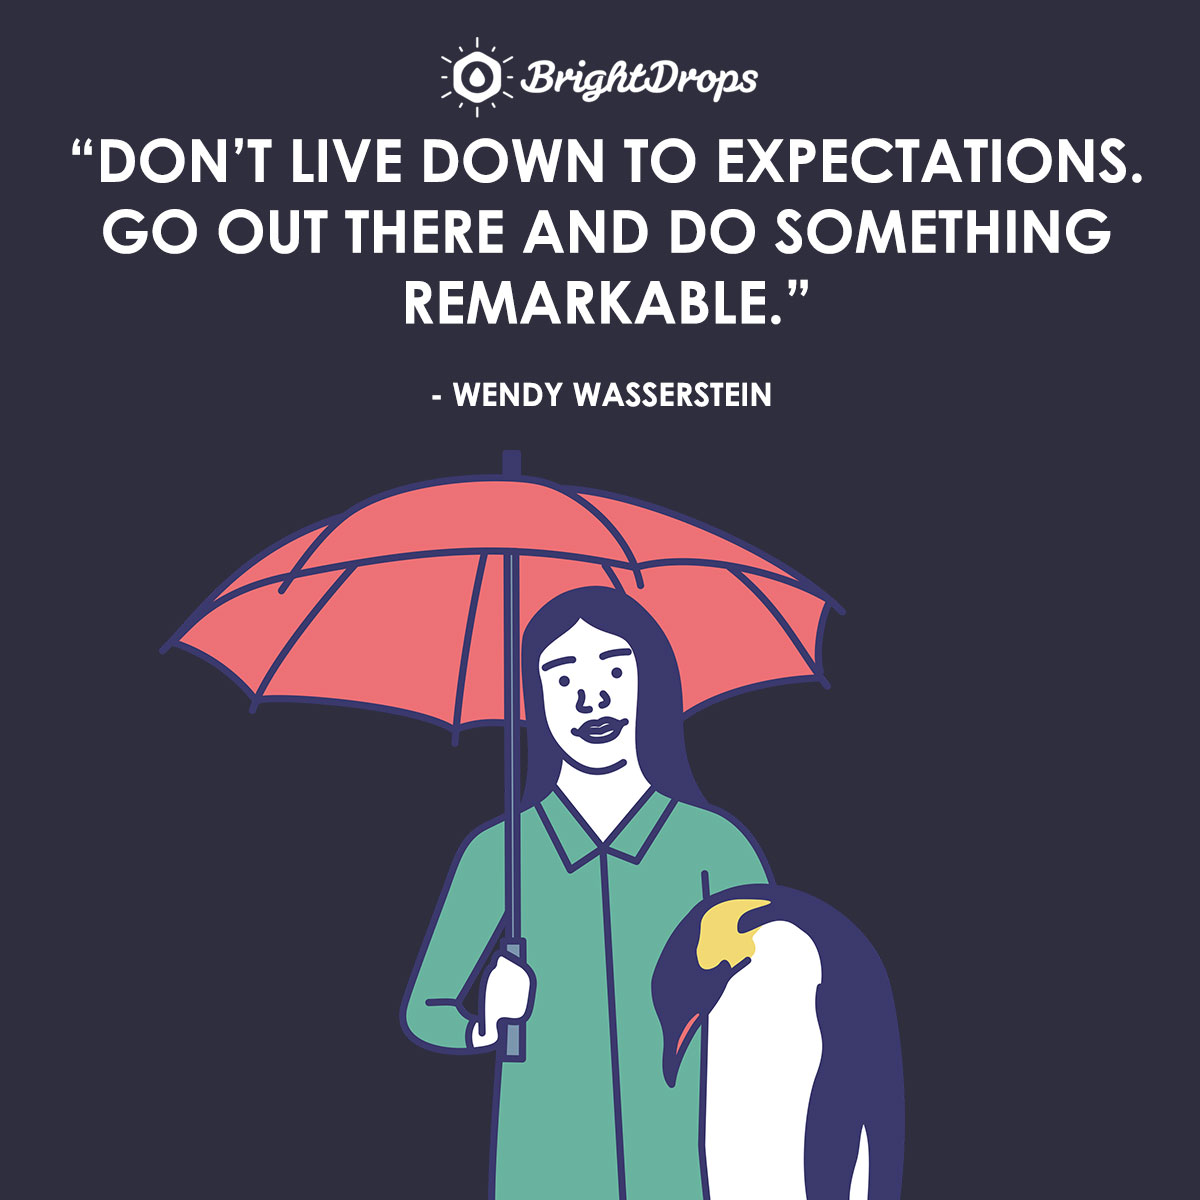 Don’t live down to expectations. Go out there and do something remarkable. - Wendy Wasserstein